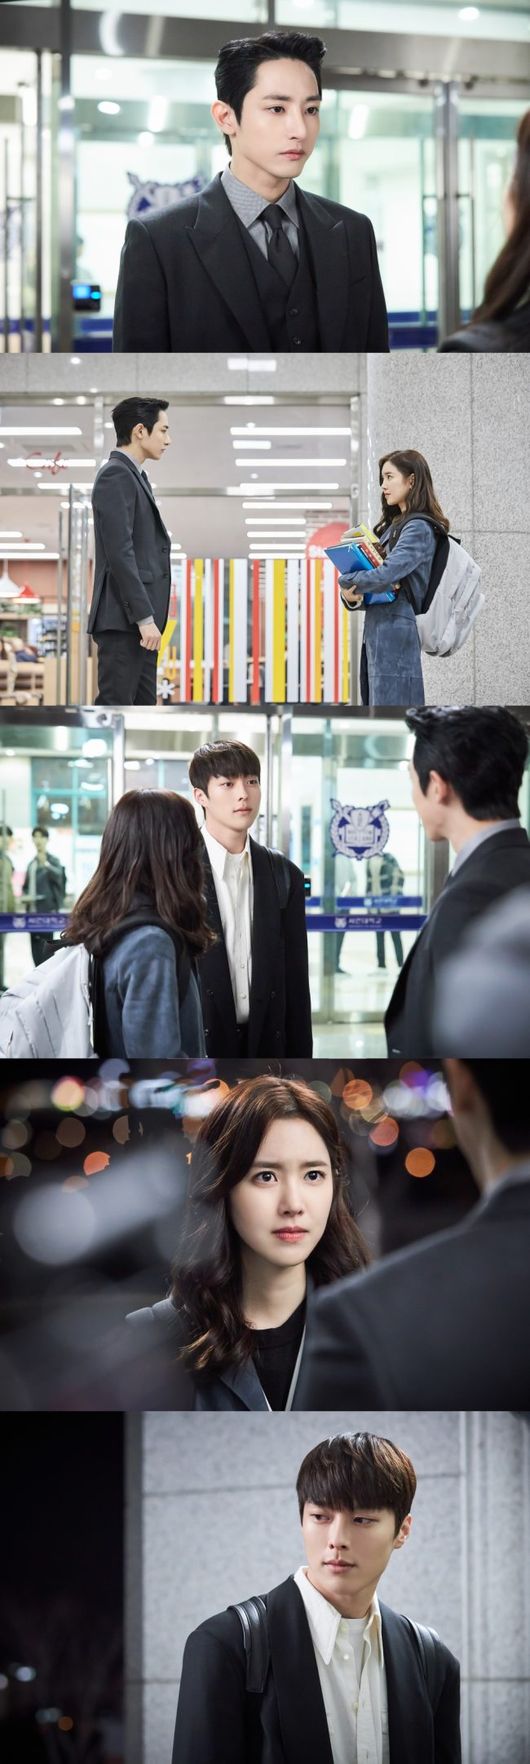 The three-way face-to-face of the night is unfolded in Bon Again, which is making viewers fall into the reincarnation mystery melodrama of Jang Ki-yong, Jin Se-yeon and Lee Soo-hyuk.The two mens nervous warfare, Jang Ki-yong, and Lee Soo-hyuk, who are medical students between Jeong Sa-bin (Jin Se-yeon), are properly ignited in the 9th and 10th KBS 2TV monthly drama Born Again (played by Jung Soo-mi and directed by Jin Hyung-wook Lee Hyun-seok), which will be broadcast on the afternoon of the 4th.In the last broadcast, it was revealed that the bone archaeologist Jeong Sa-bin was the reincarnation of Jin Se-yeon, who ran the old bookstore Old Future in the 1980s.In addition, Jeong Sa-bin and two men began to get entangled in her current life, such as Gong Ji-cheol (Jang Ki-yong) and Lee Soo-hyuk (Lee Soo-hyuk), who had a confrontation with her in her previous life.Especially, the heart of Jeong Sabin reacts to Kim Soo-hyuk, and Chun Jong-bum and Kim Soo-hyuk both feel pain in her heart and herald an unpredictable triangular melody.Kim Soo-hyuk, who had a heartbeat with a heartbeat in the middle of the day, came to the front of the school where she lectured and caused another heartbeat.I wonder why the cold blooded man who was only interested in catching criminals ran directly to her.Here, there is another excitement that comes to the appearance of the younger son, Chun Jong Bum, who was straight ahead with a sweet eye to Jeong Sabin.Above all, Chun Jong-beom has had a nervous battle with Kim Soo-hyuk, who suspected him of being a suspect in the Gong Ji-cheol imitation crime, which makes him guess the tight battle between the two men.In addition, for some reason, there is a lot of interest in the middle of the night, not when the appearance of Jeong Sabin, who is angry at Kim Soo-hyuk, and Chun Jong-bum, who looks at her.It airs today (4th) at 10pm.UFO Productions Provides Monster Union